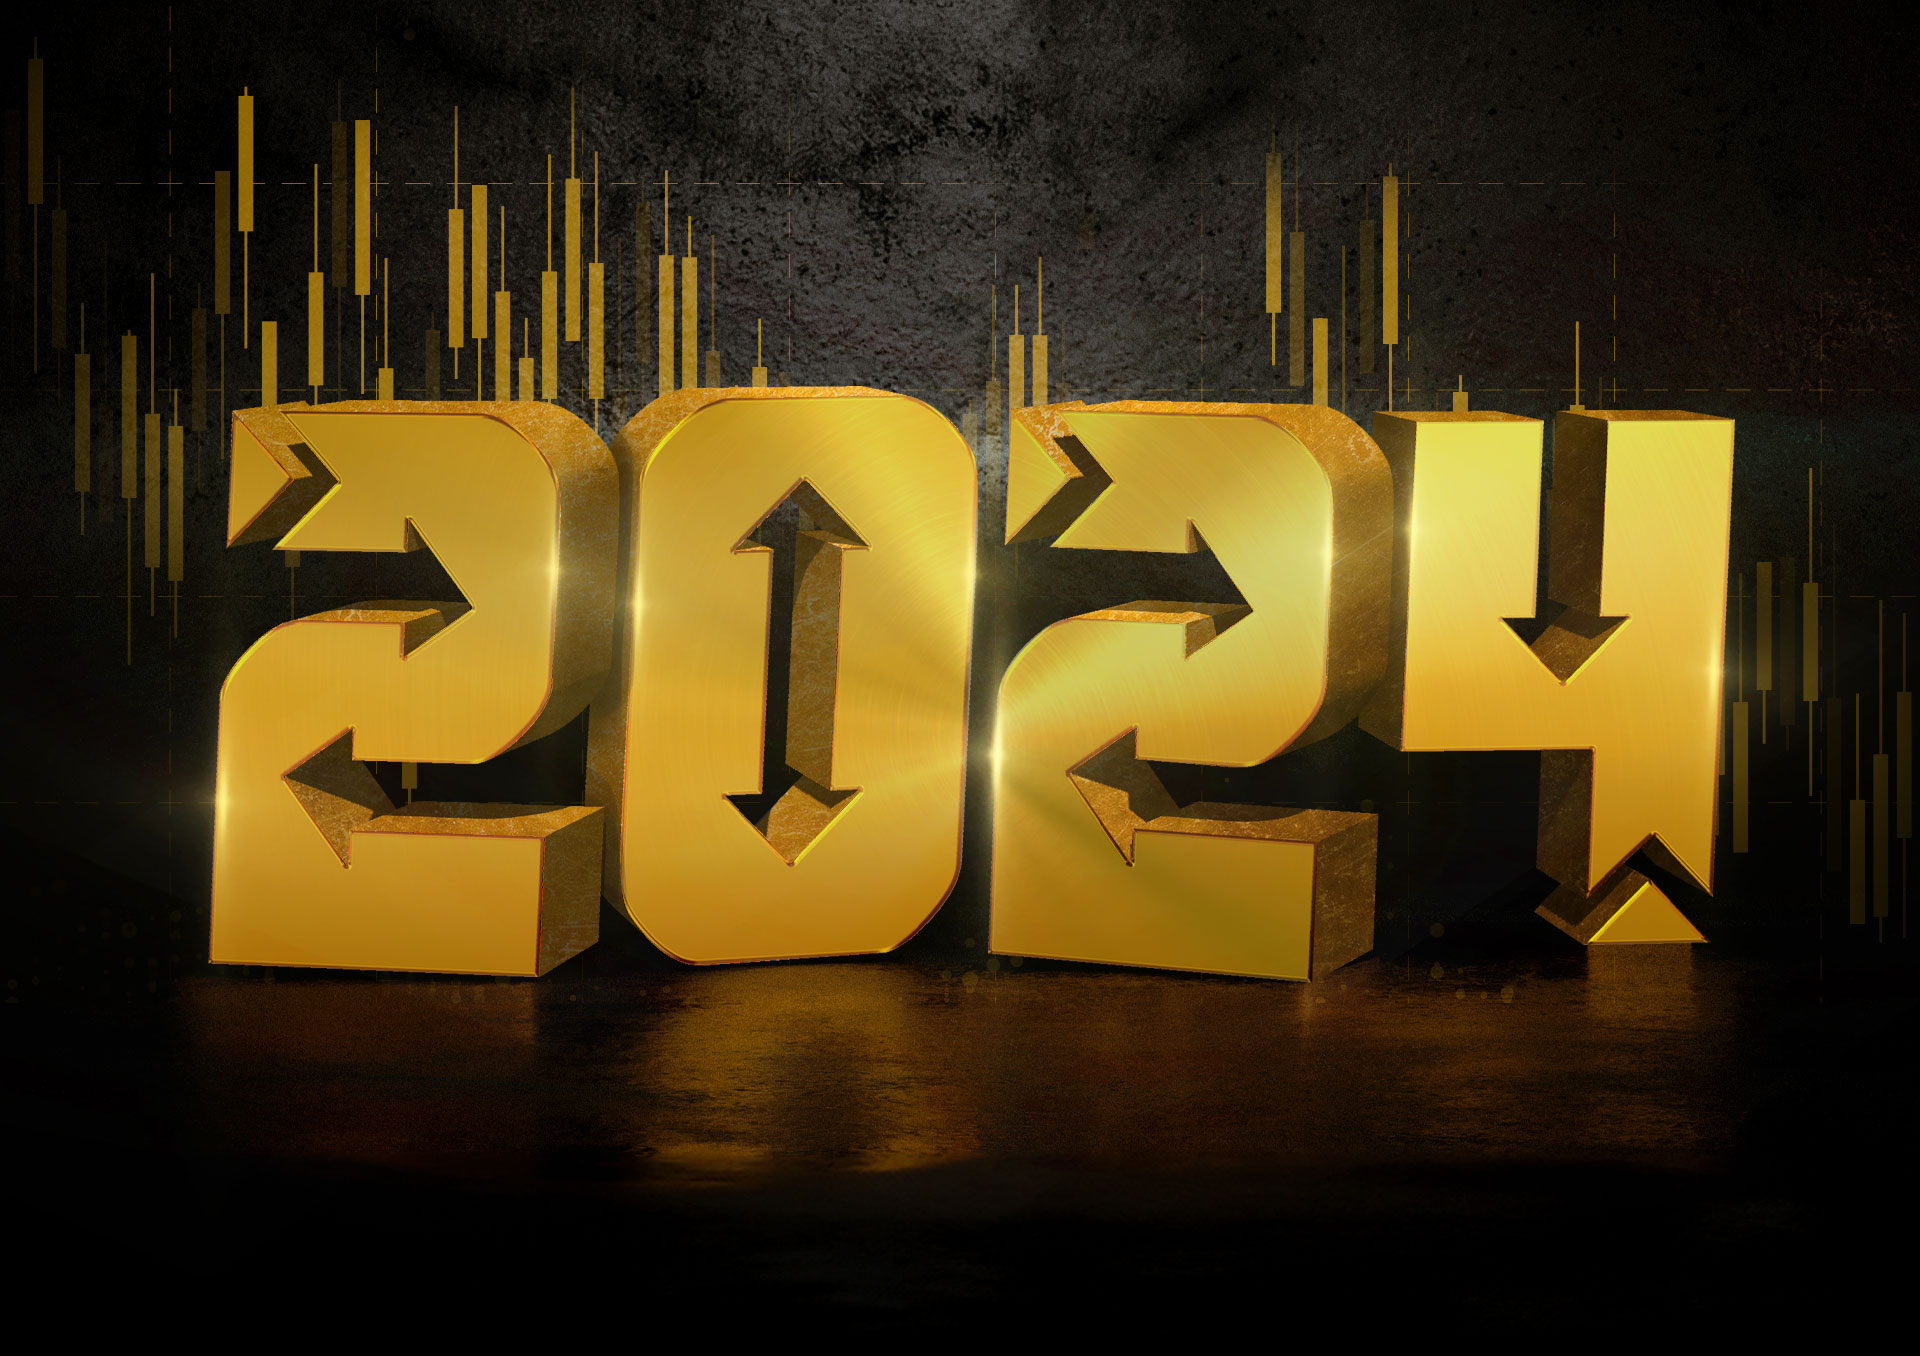 Dahab Masr team’s technical analysis and vision for gold prices in 2024